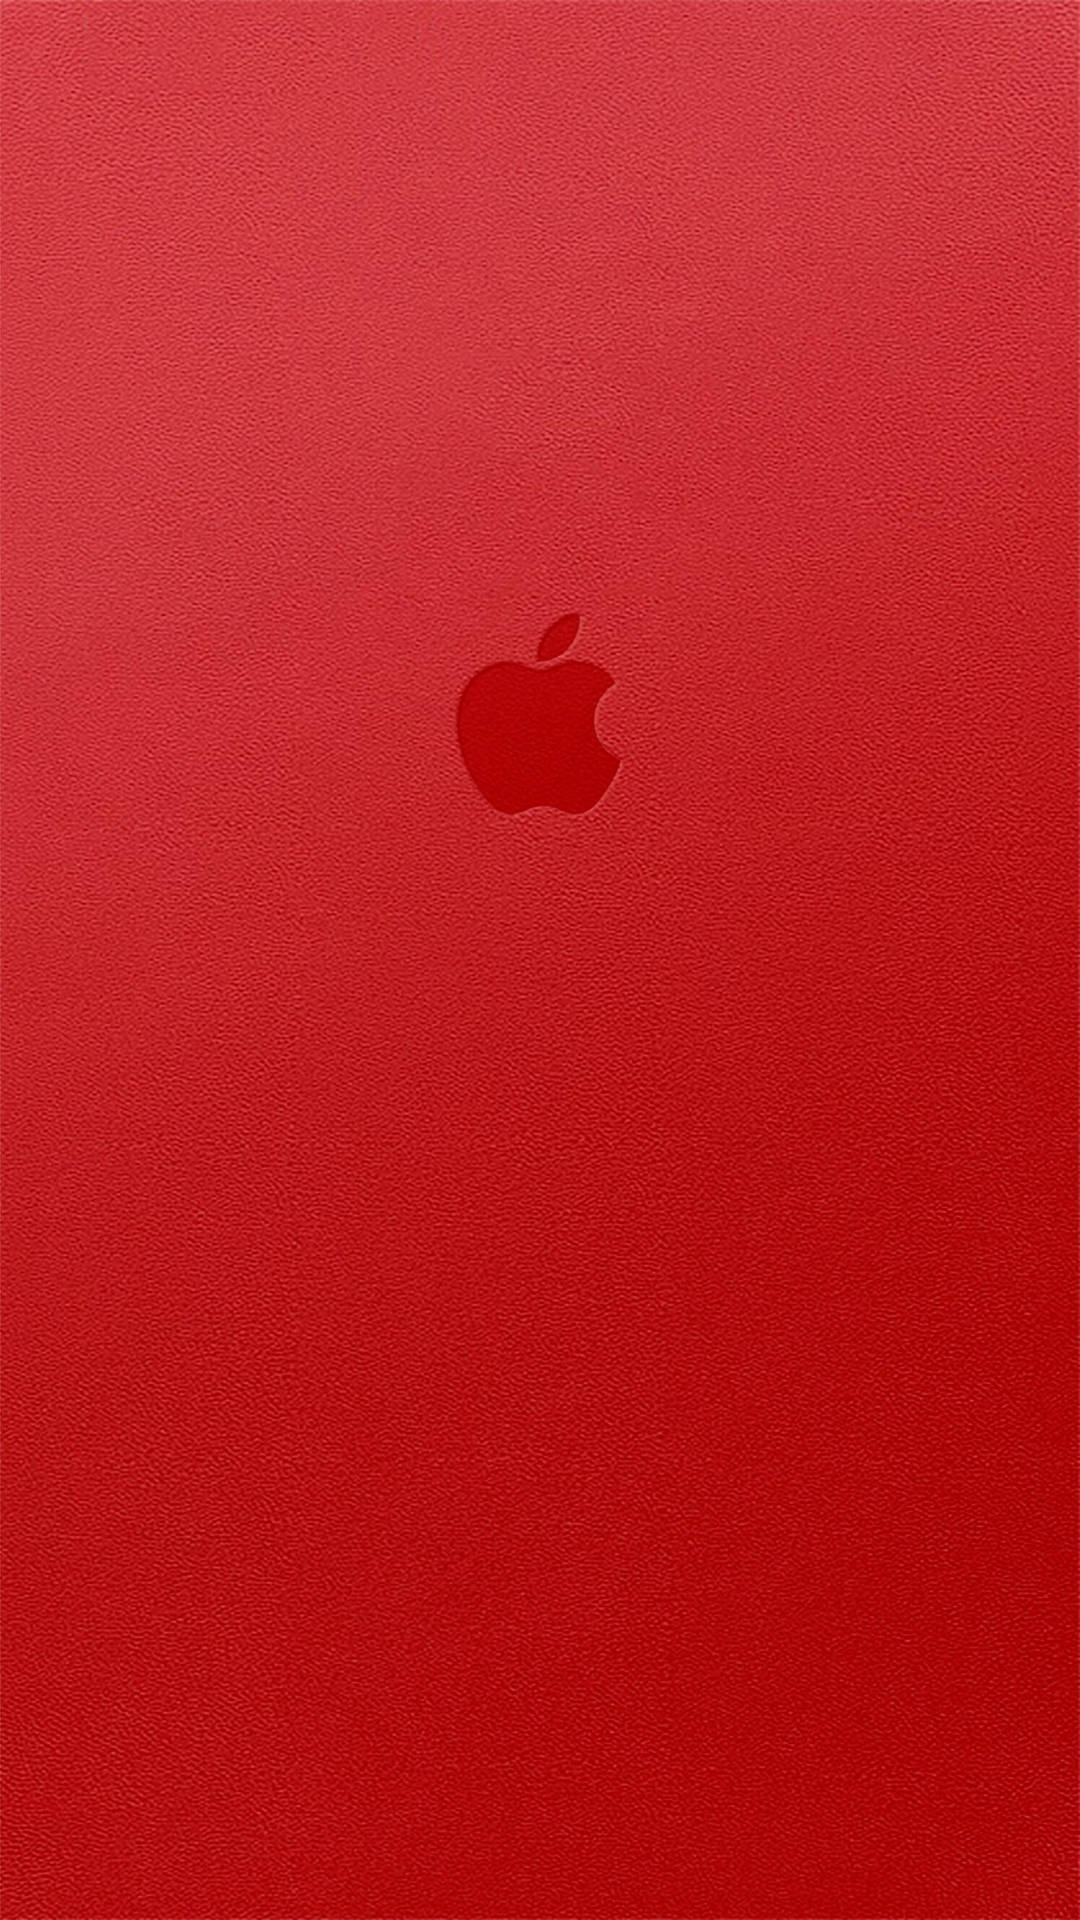 Apple Logo Red Iphone Background